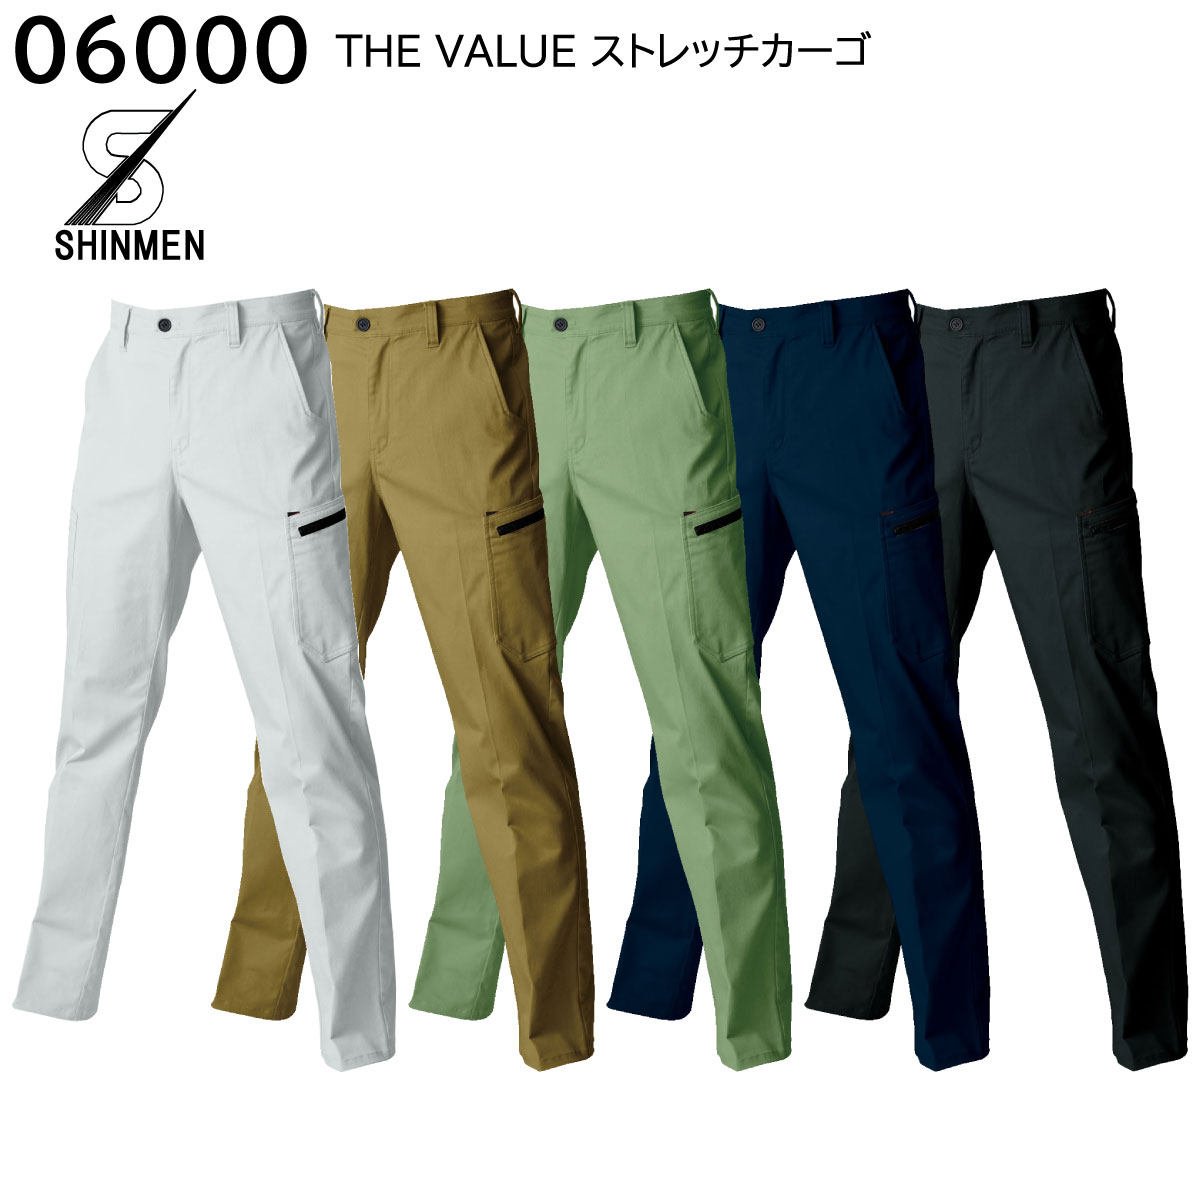 THE VALUE ストレッチカーゴ 06000 S〜3L シンメン 5色展開